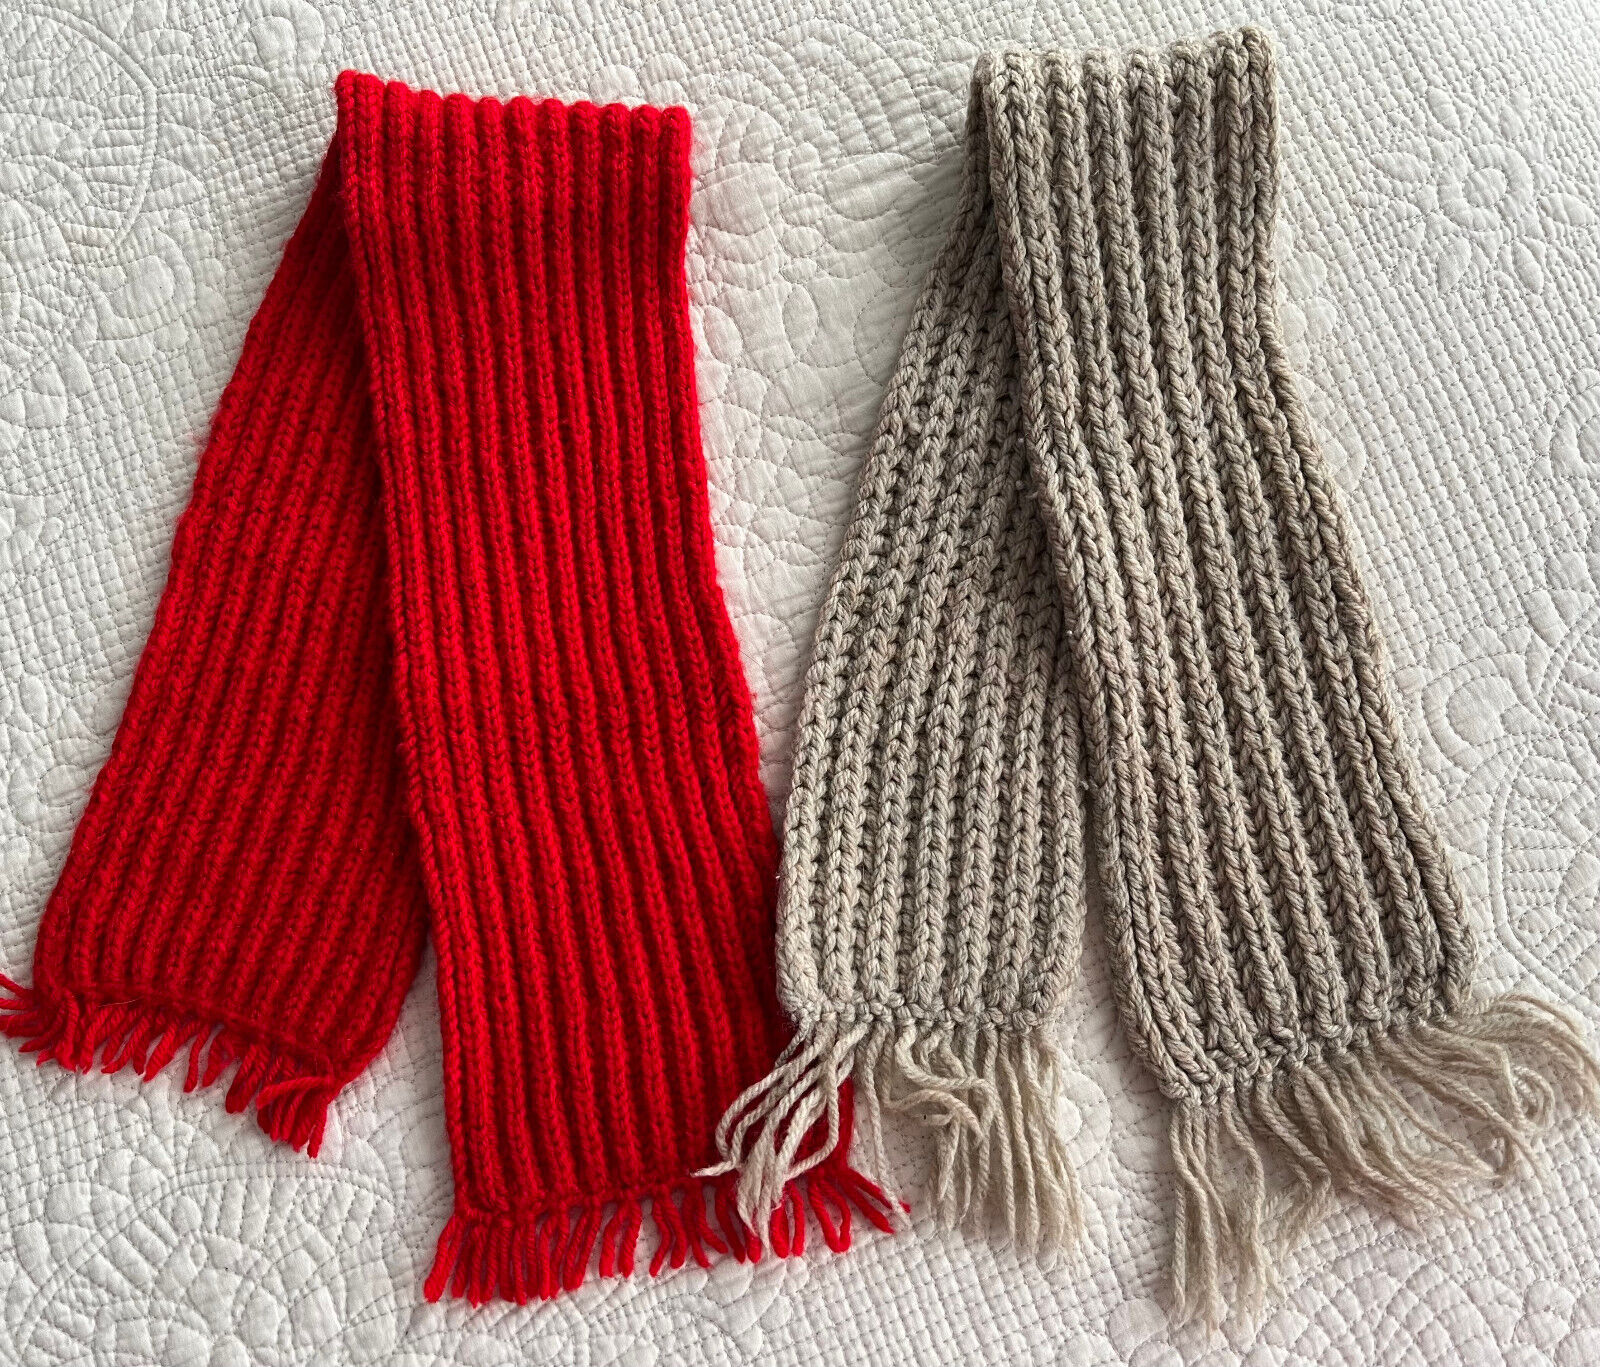 Lot 2 Boys Knit Scarves Red And Beige Sizes Small 4-6